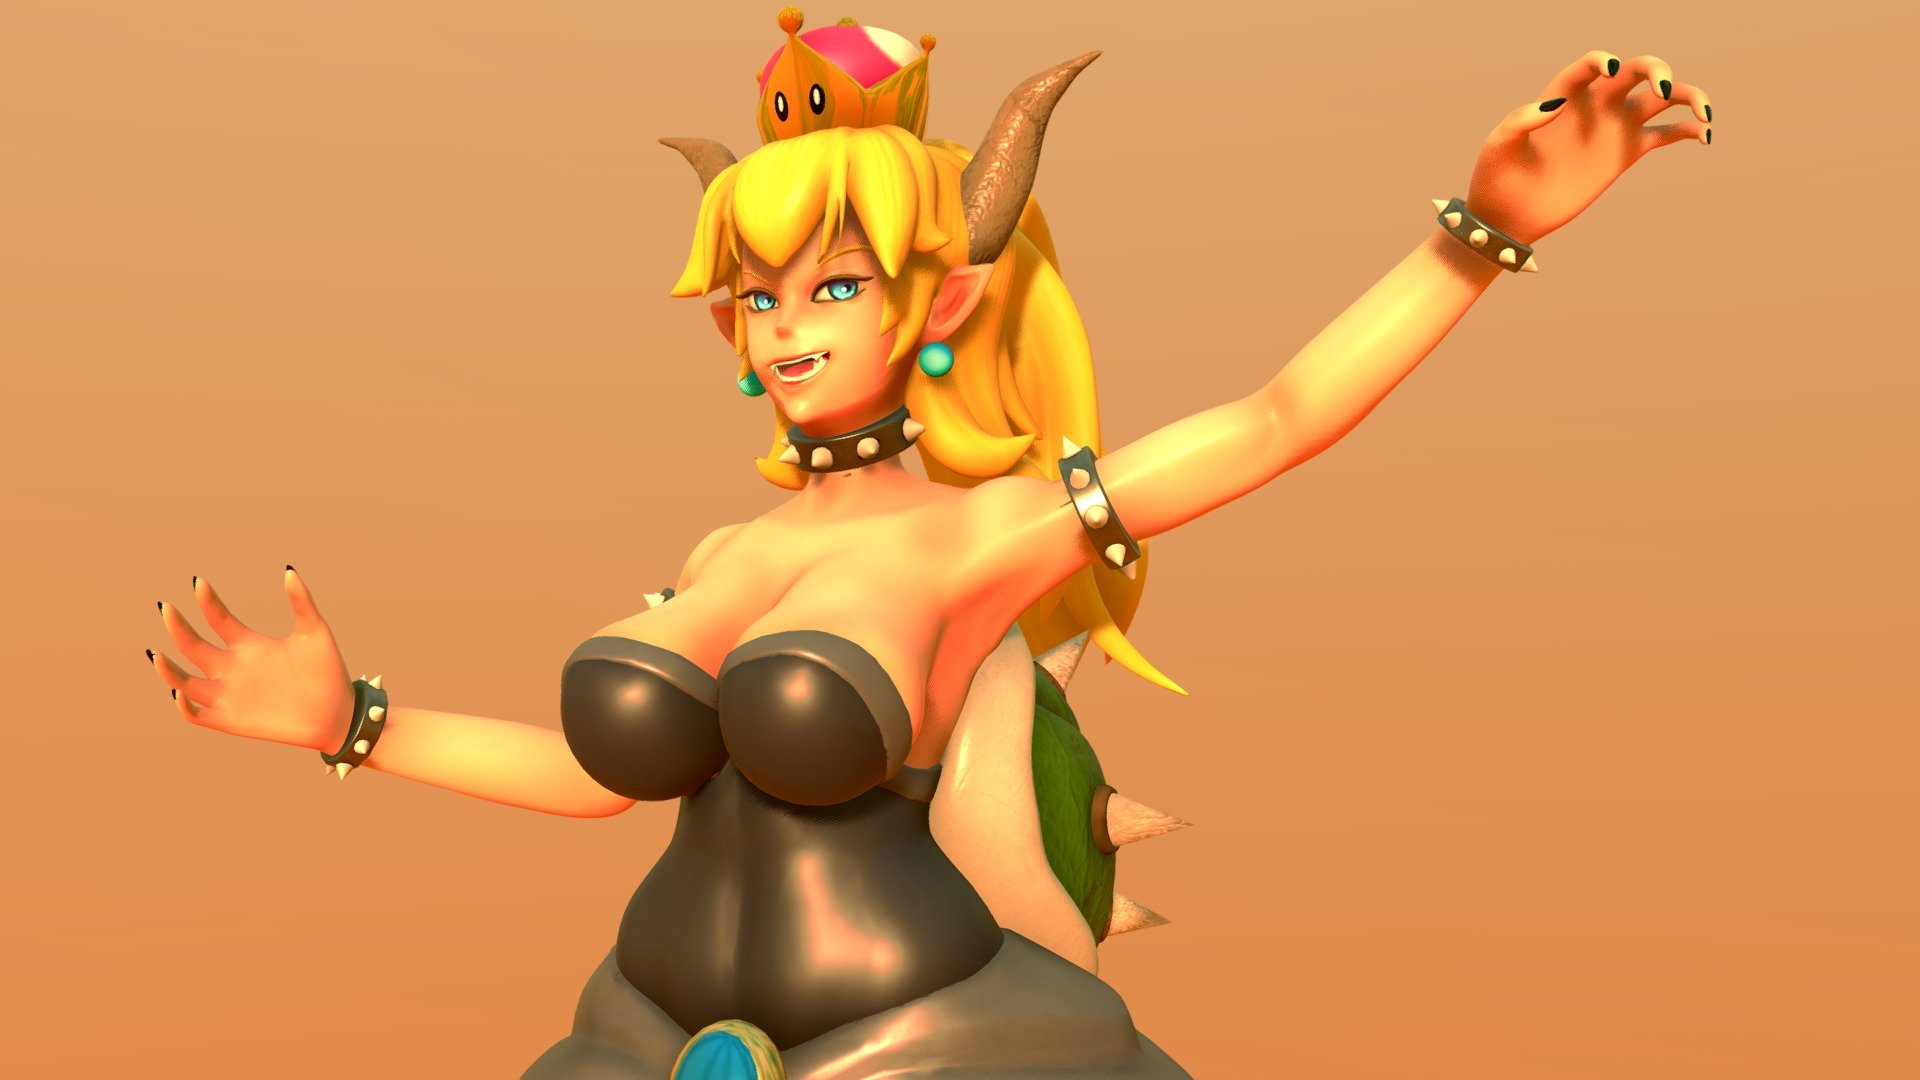 UPDATED WITH 3D PRINTABLE BUST

Gotta catch on the latest internet's hot trend!
Bowsette /クッパ姫 fan art 3D sculpt. It's up for download. The package contains:




.fbx 3D model

PBR textures including blonde and red haired Bowsette

Marmoset scene for rendering purposes 

.obj Bust for 3D printing


 - Bowsette PBR + 3D Printing - Buy Royalty Free 3D model by Giru 3d model